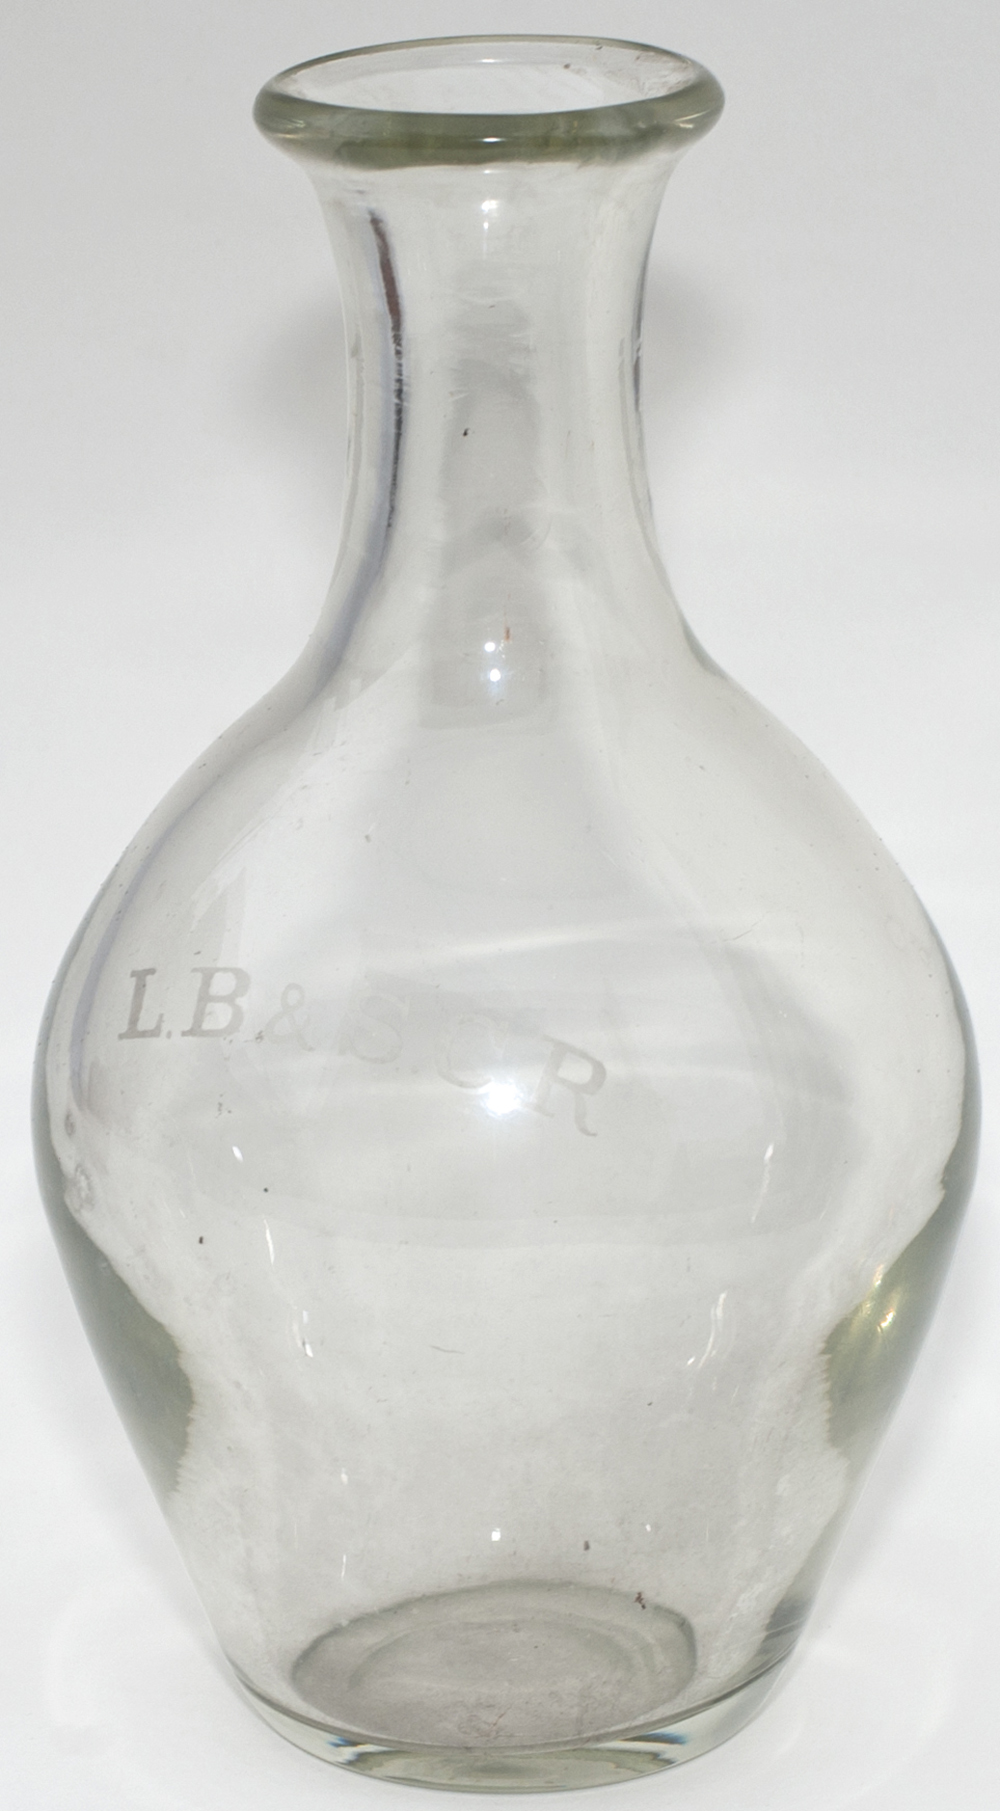 London Brighton and South Coast Railway glass WINE CARAFFE, acid etched to the front L.B & S.C.R.